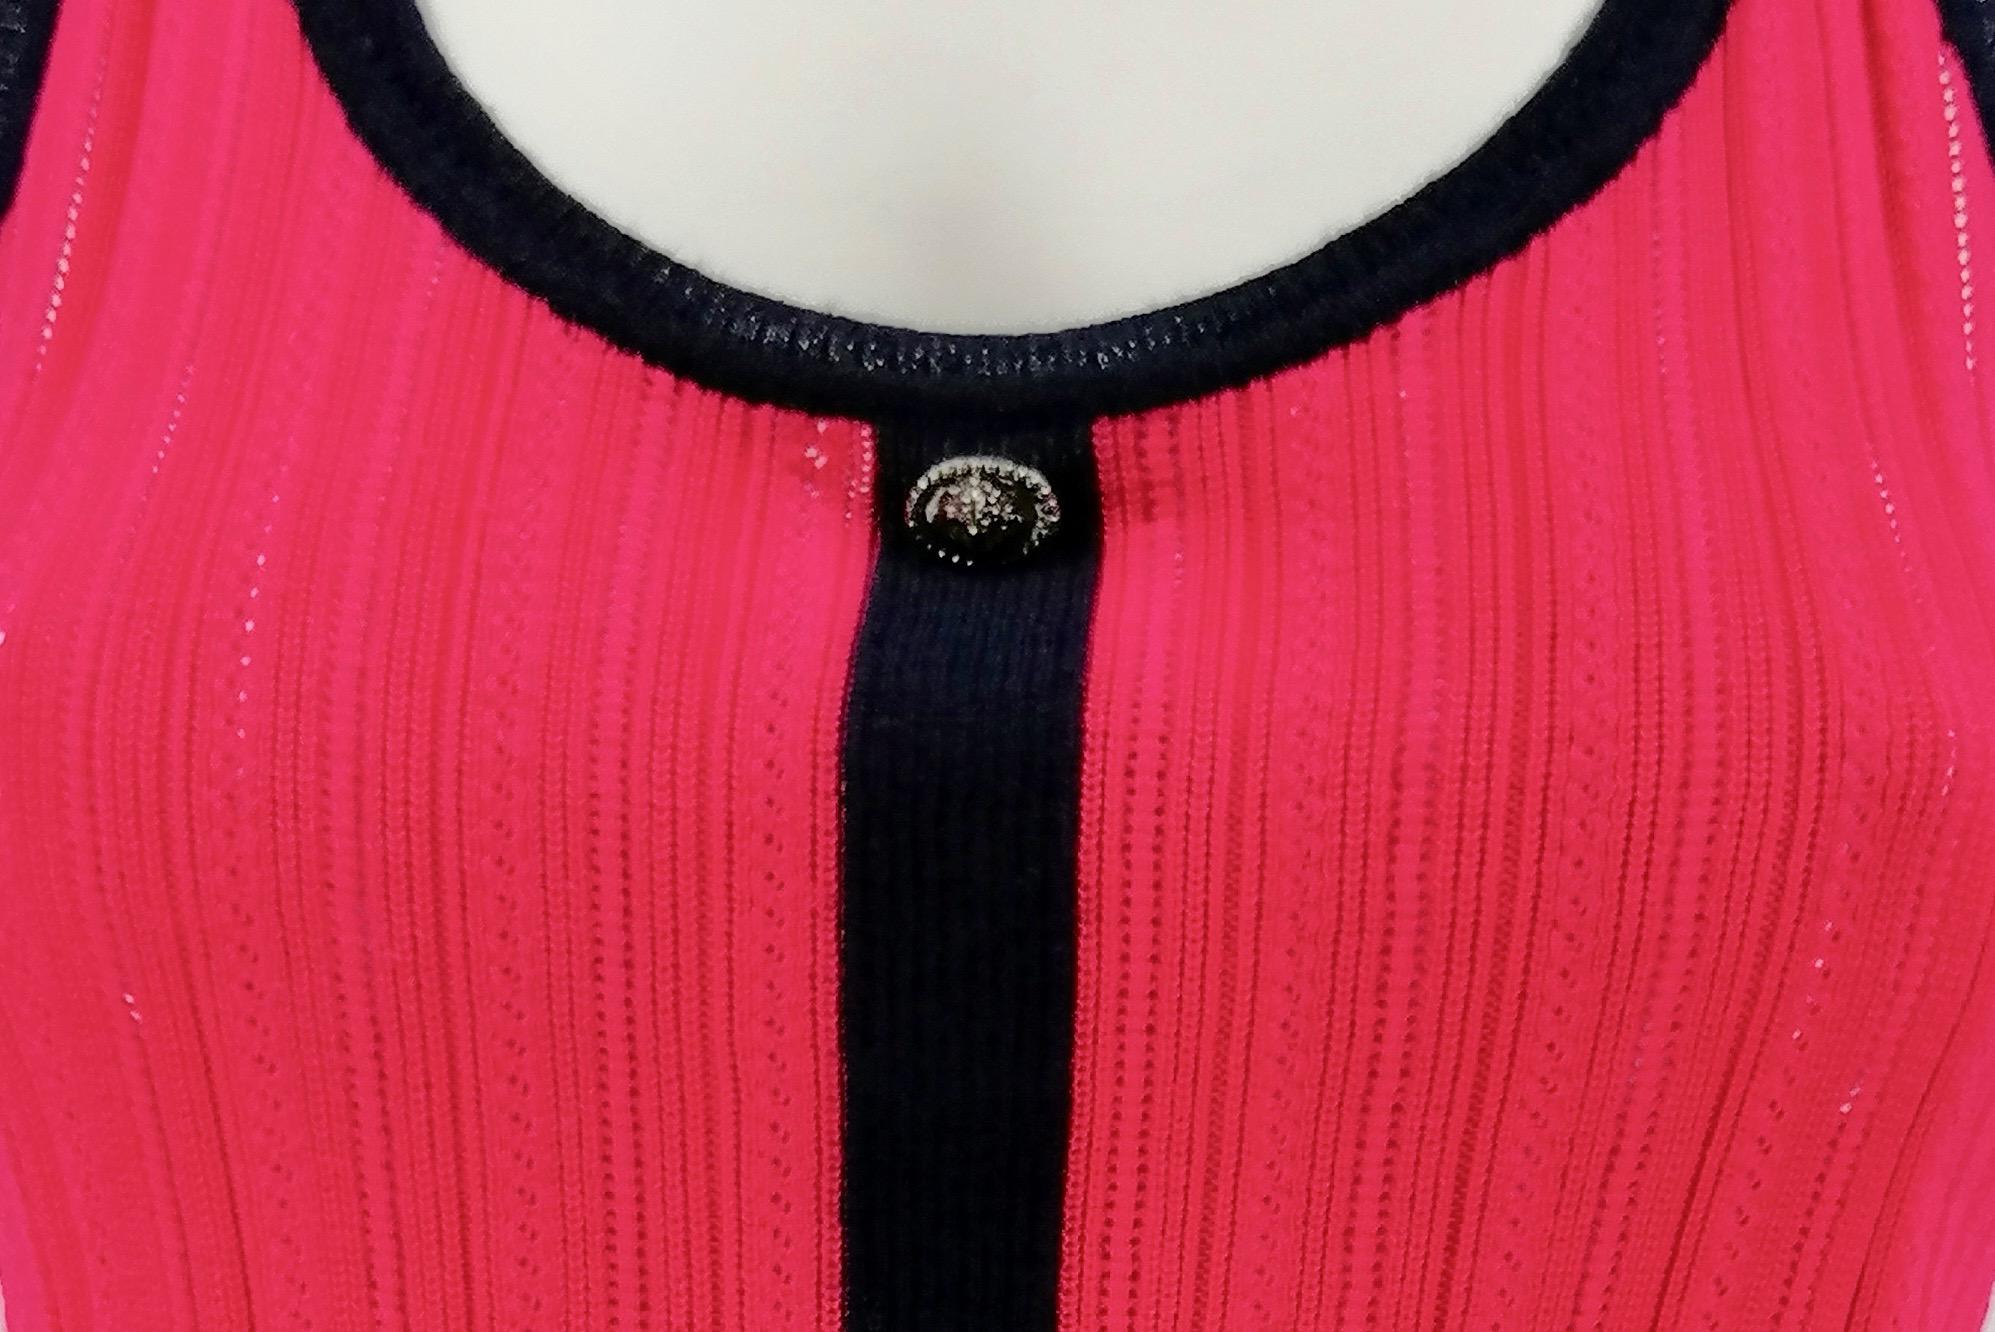 CHANEL
Red and navy top
75% cotton
17% cashmere
  8% silk
Size FR 42
Made in Italy
Flat measures:
Length cm. 64
Shoulders cm. 28
Bust cm. 37
Excellent condition